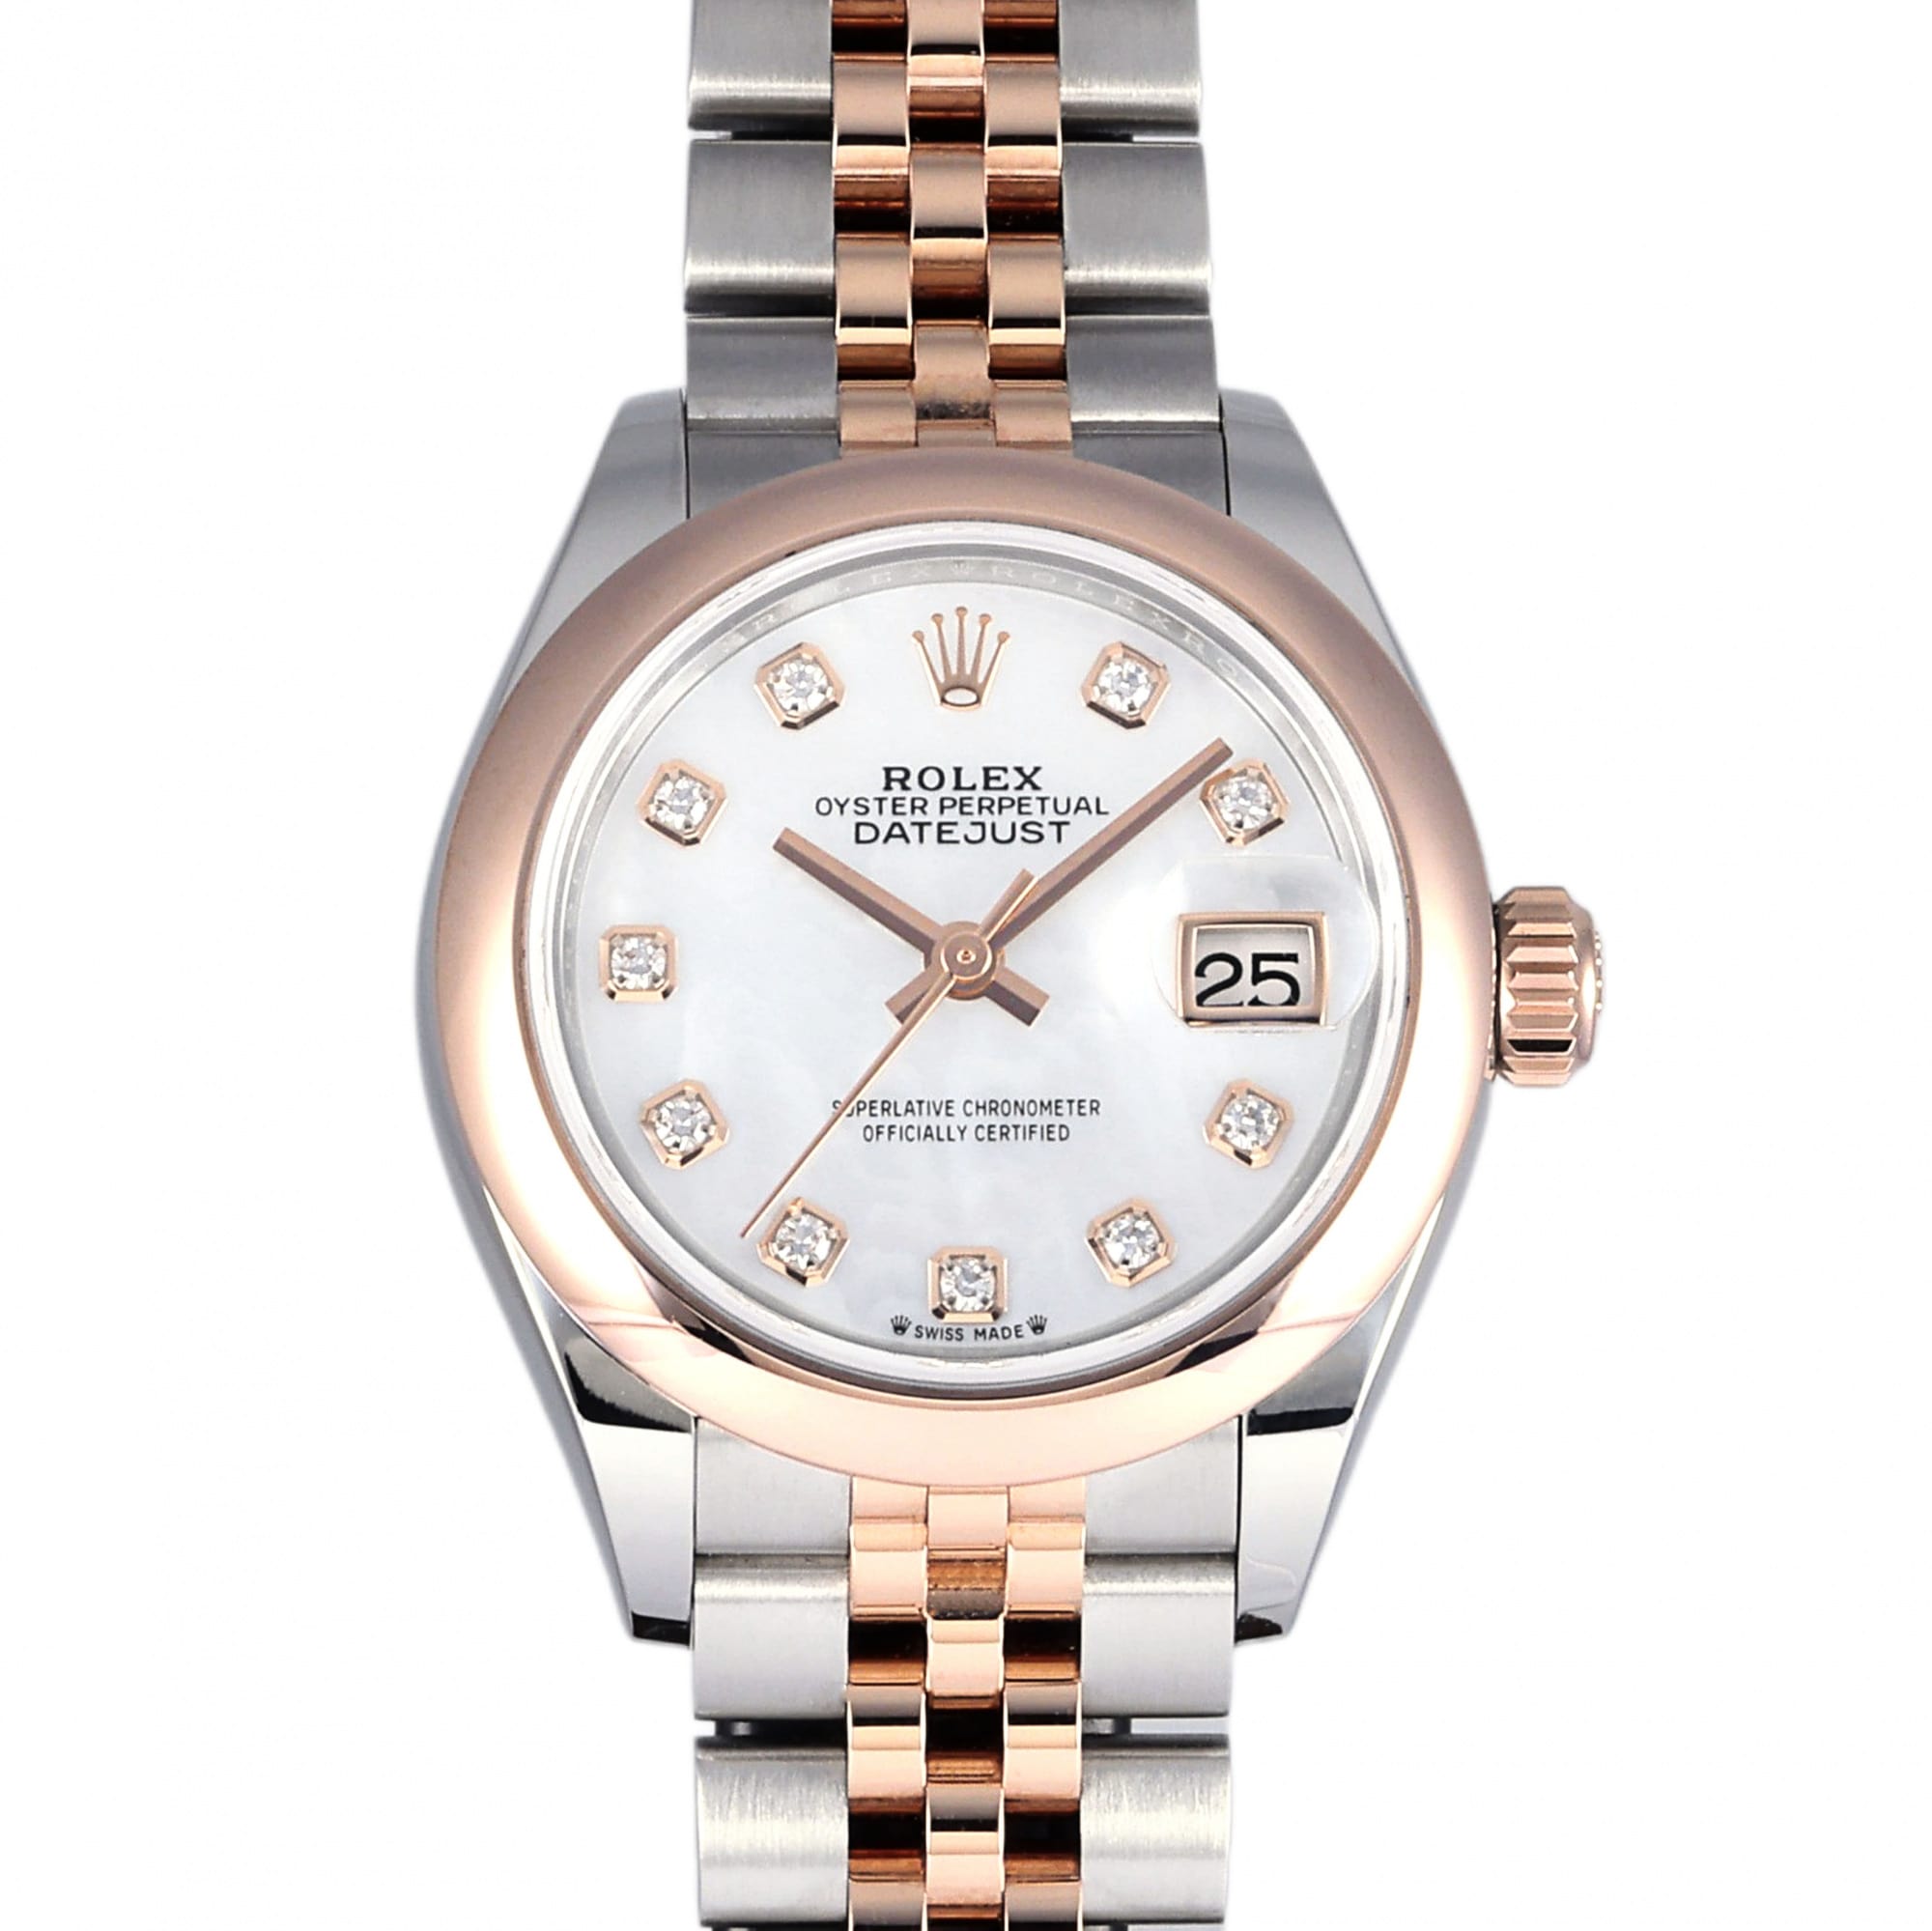 Rolex Datejust White Shell 279161NG